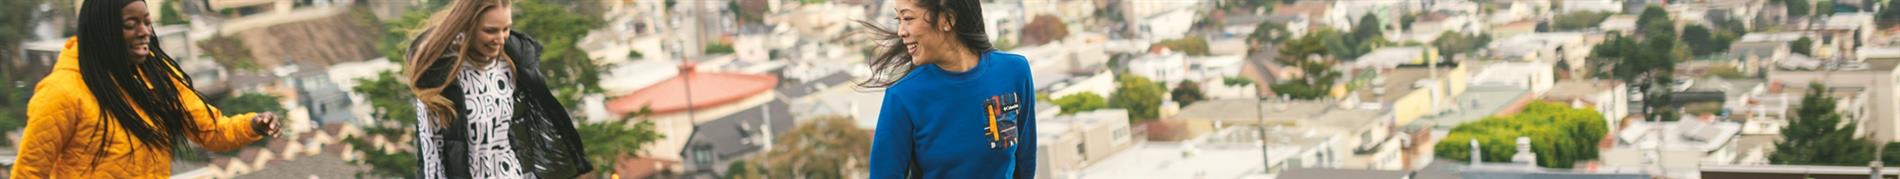 Under Armour Women's Winter Lifestyle Clothing 